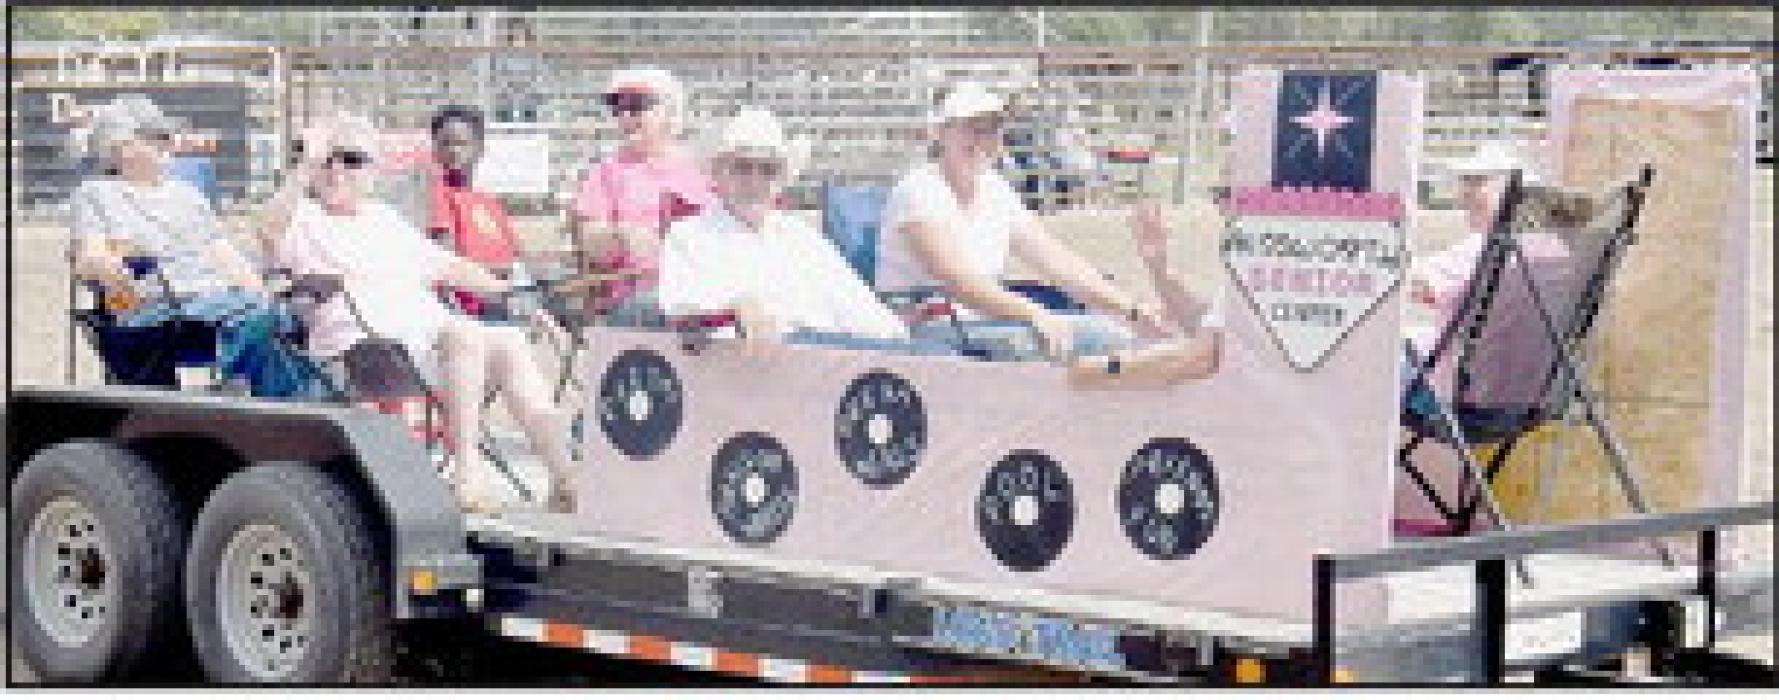 Ainsworth Senior Center took first place in the Commercial Float category.